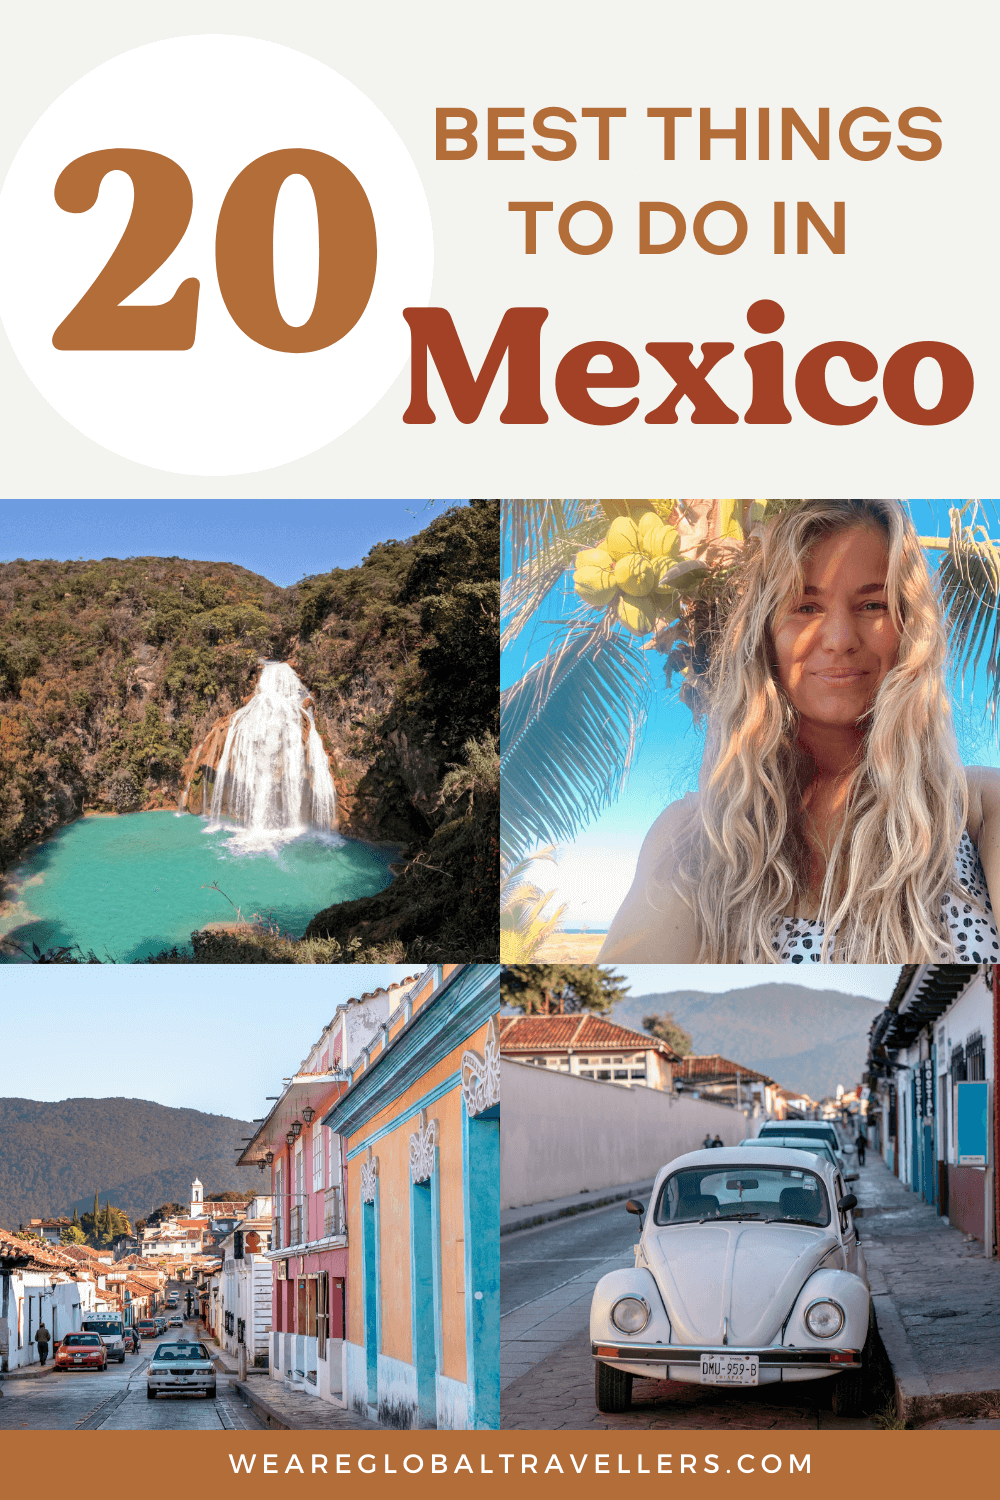 The best things to do and see in Mexico